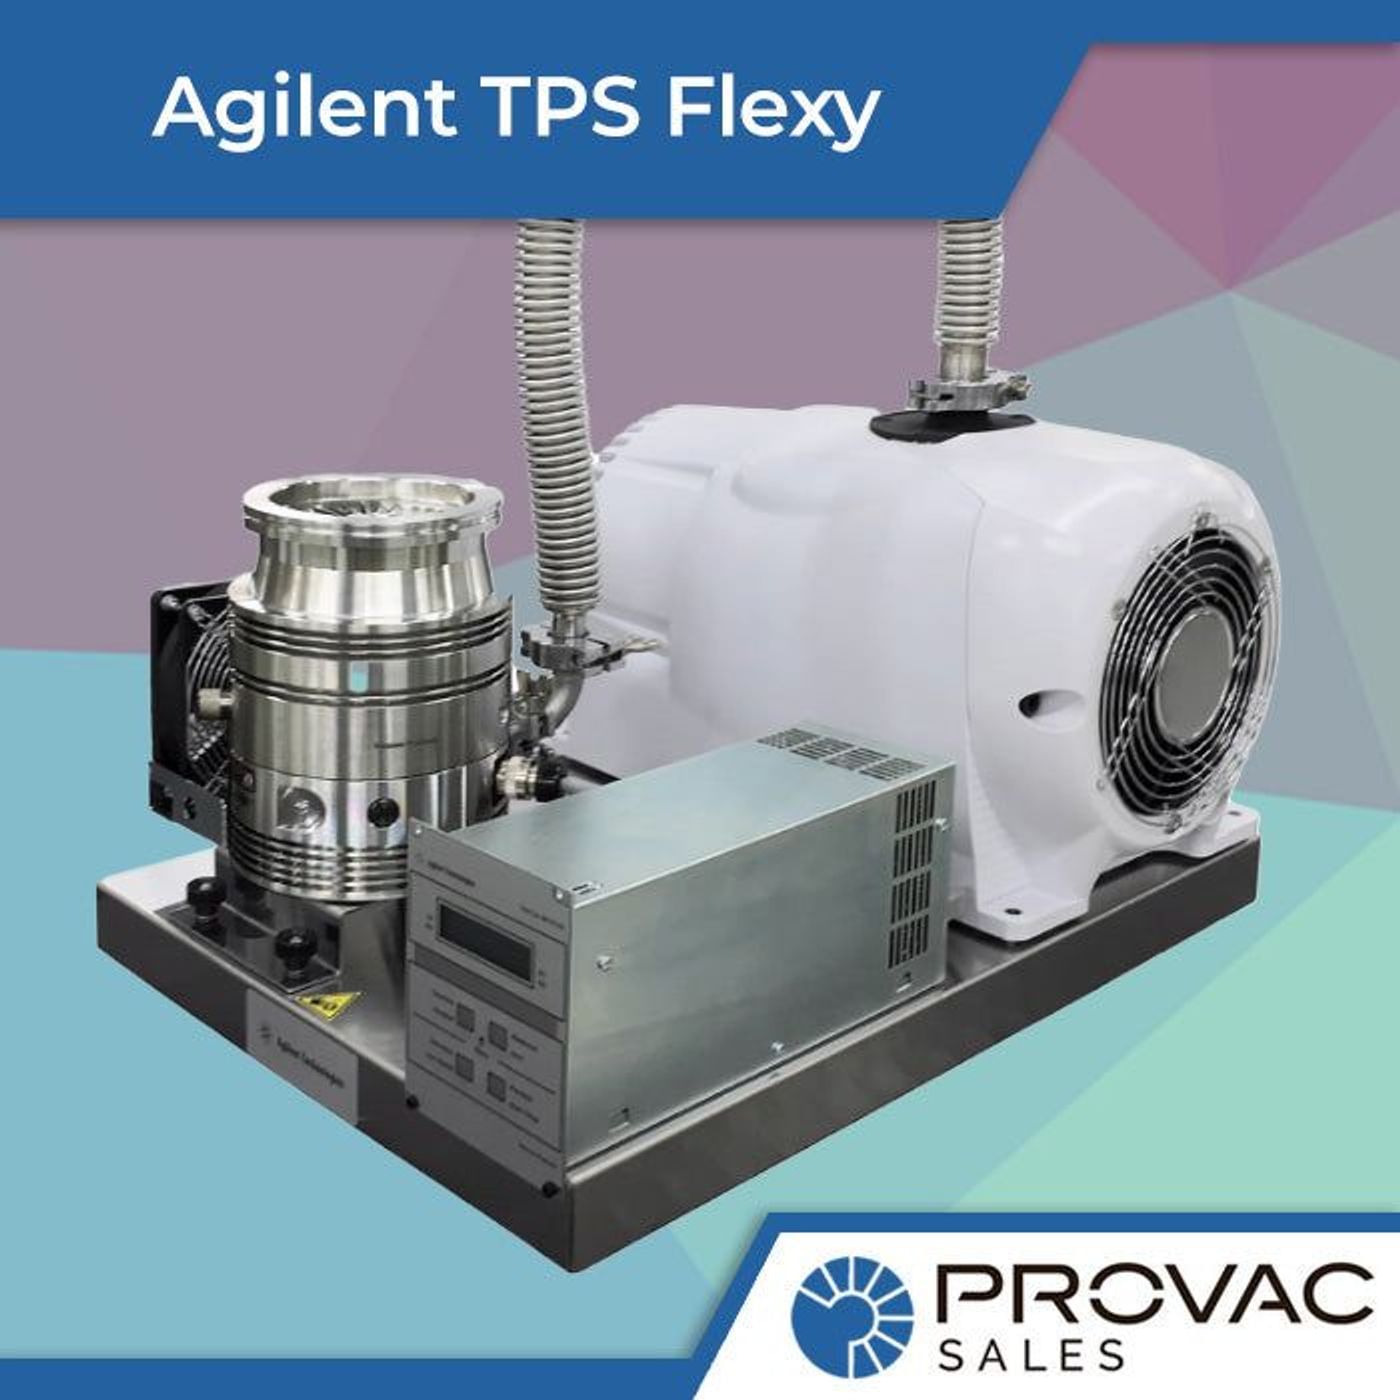 Agilent TPS Flexy Pumping Station with IDP-15